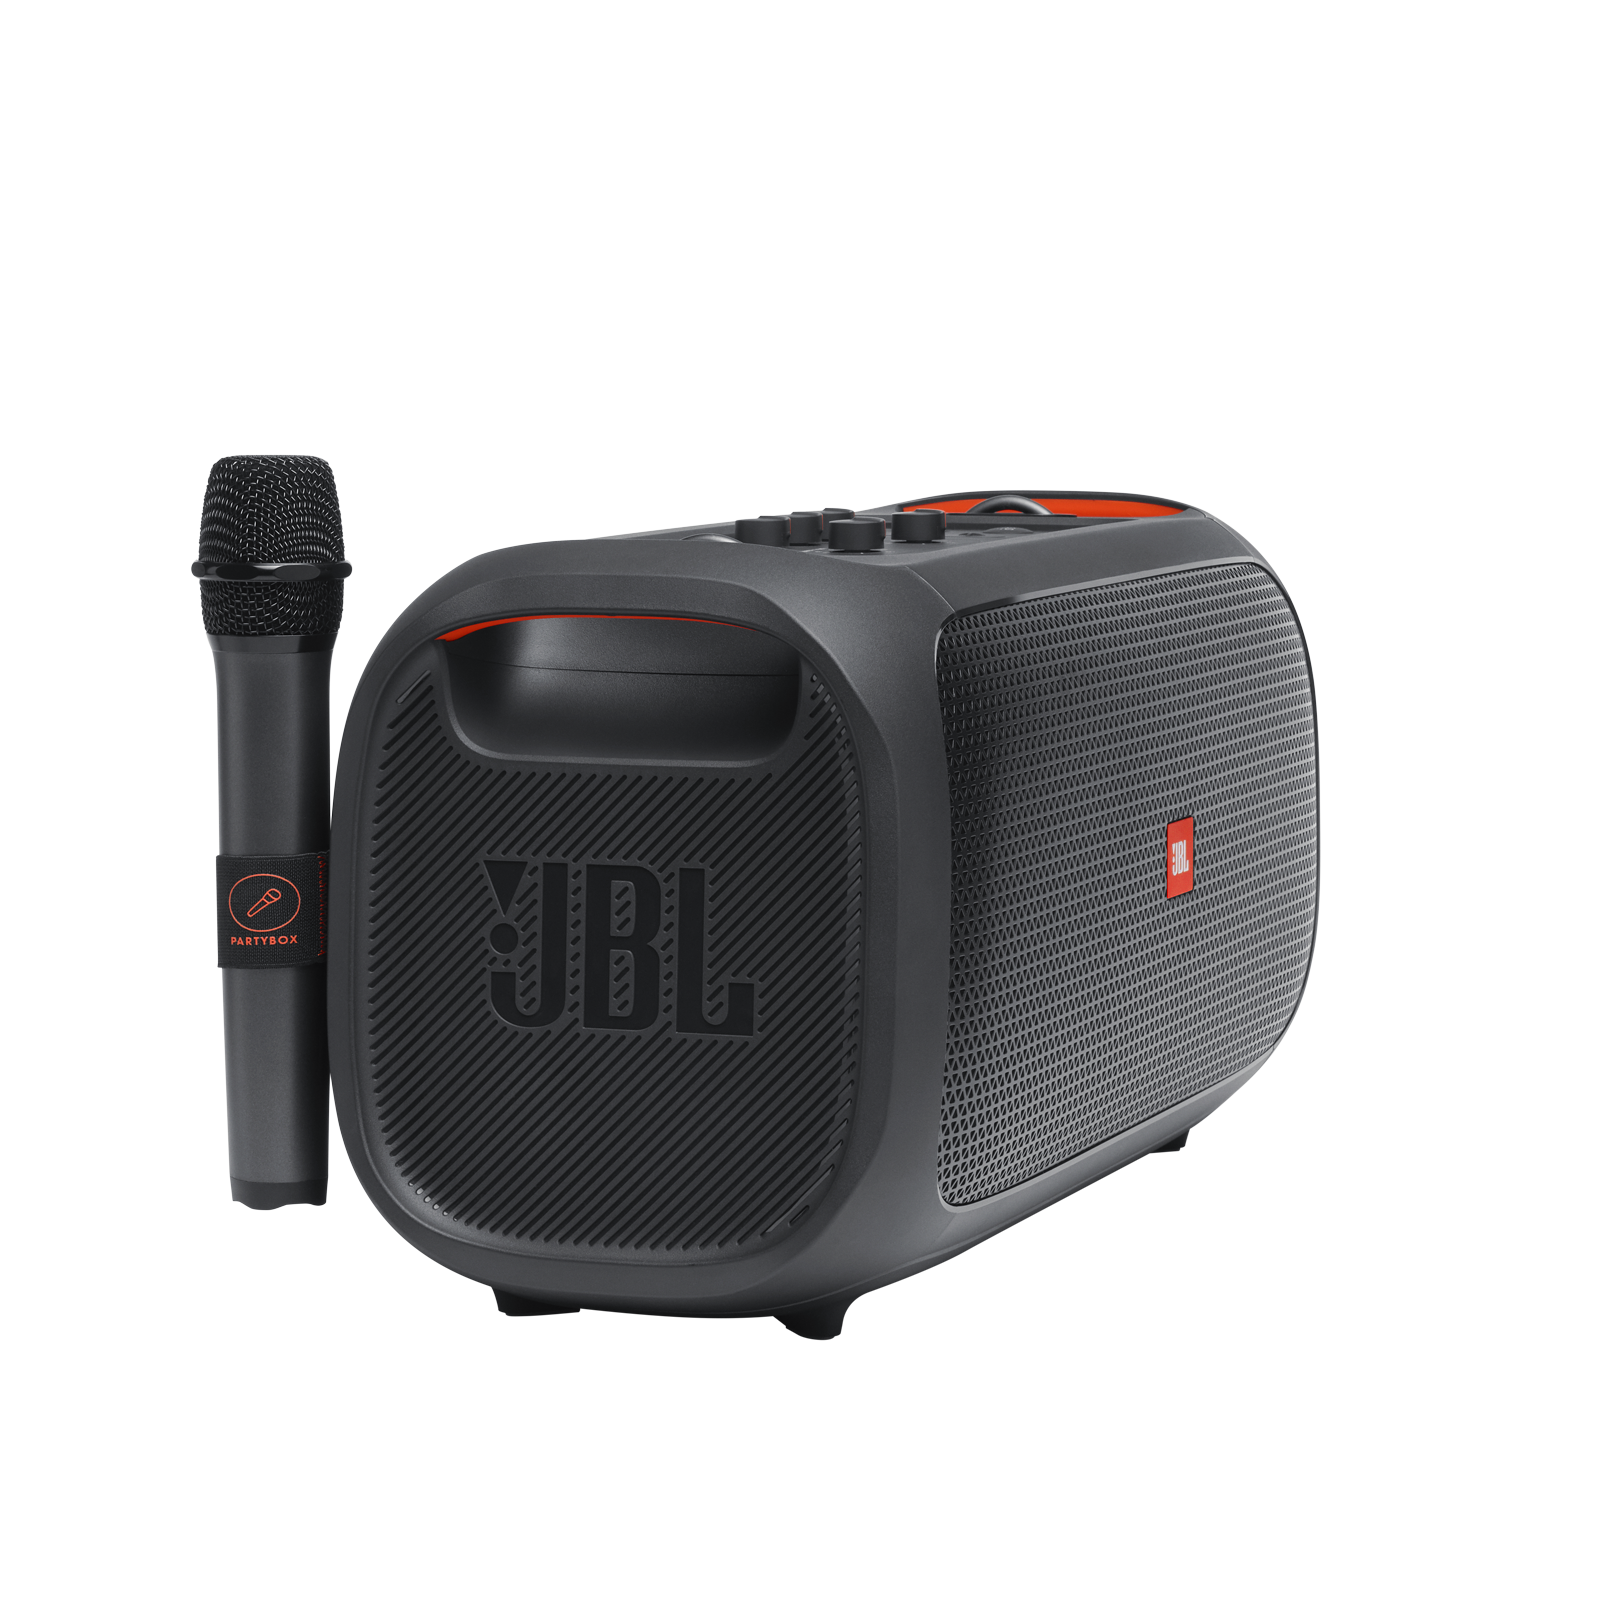 JBL PartyBox On-The-Go - Black - Portable party speaker with built-in lights and wireless mic - Detailshot 1